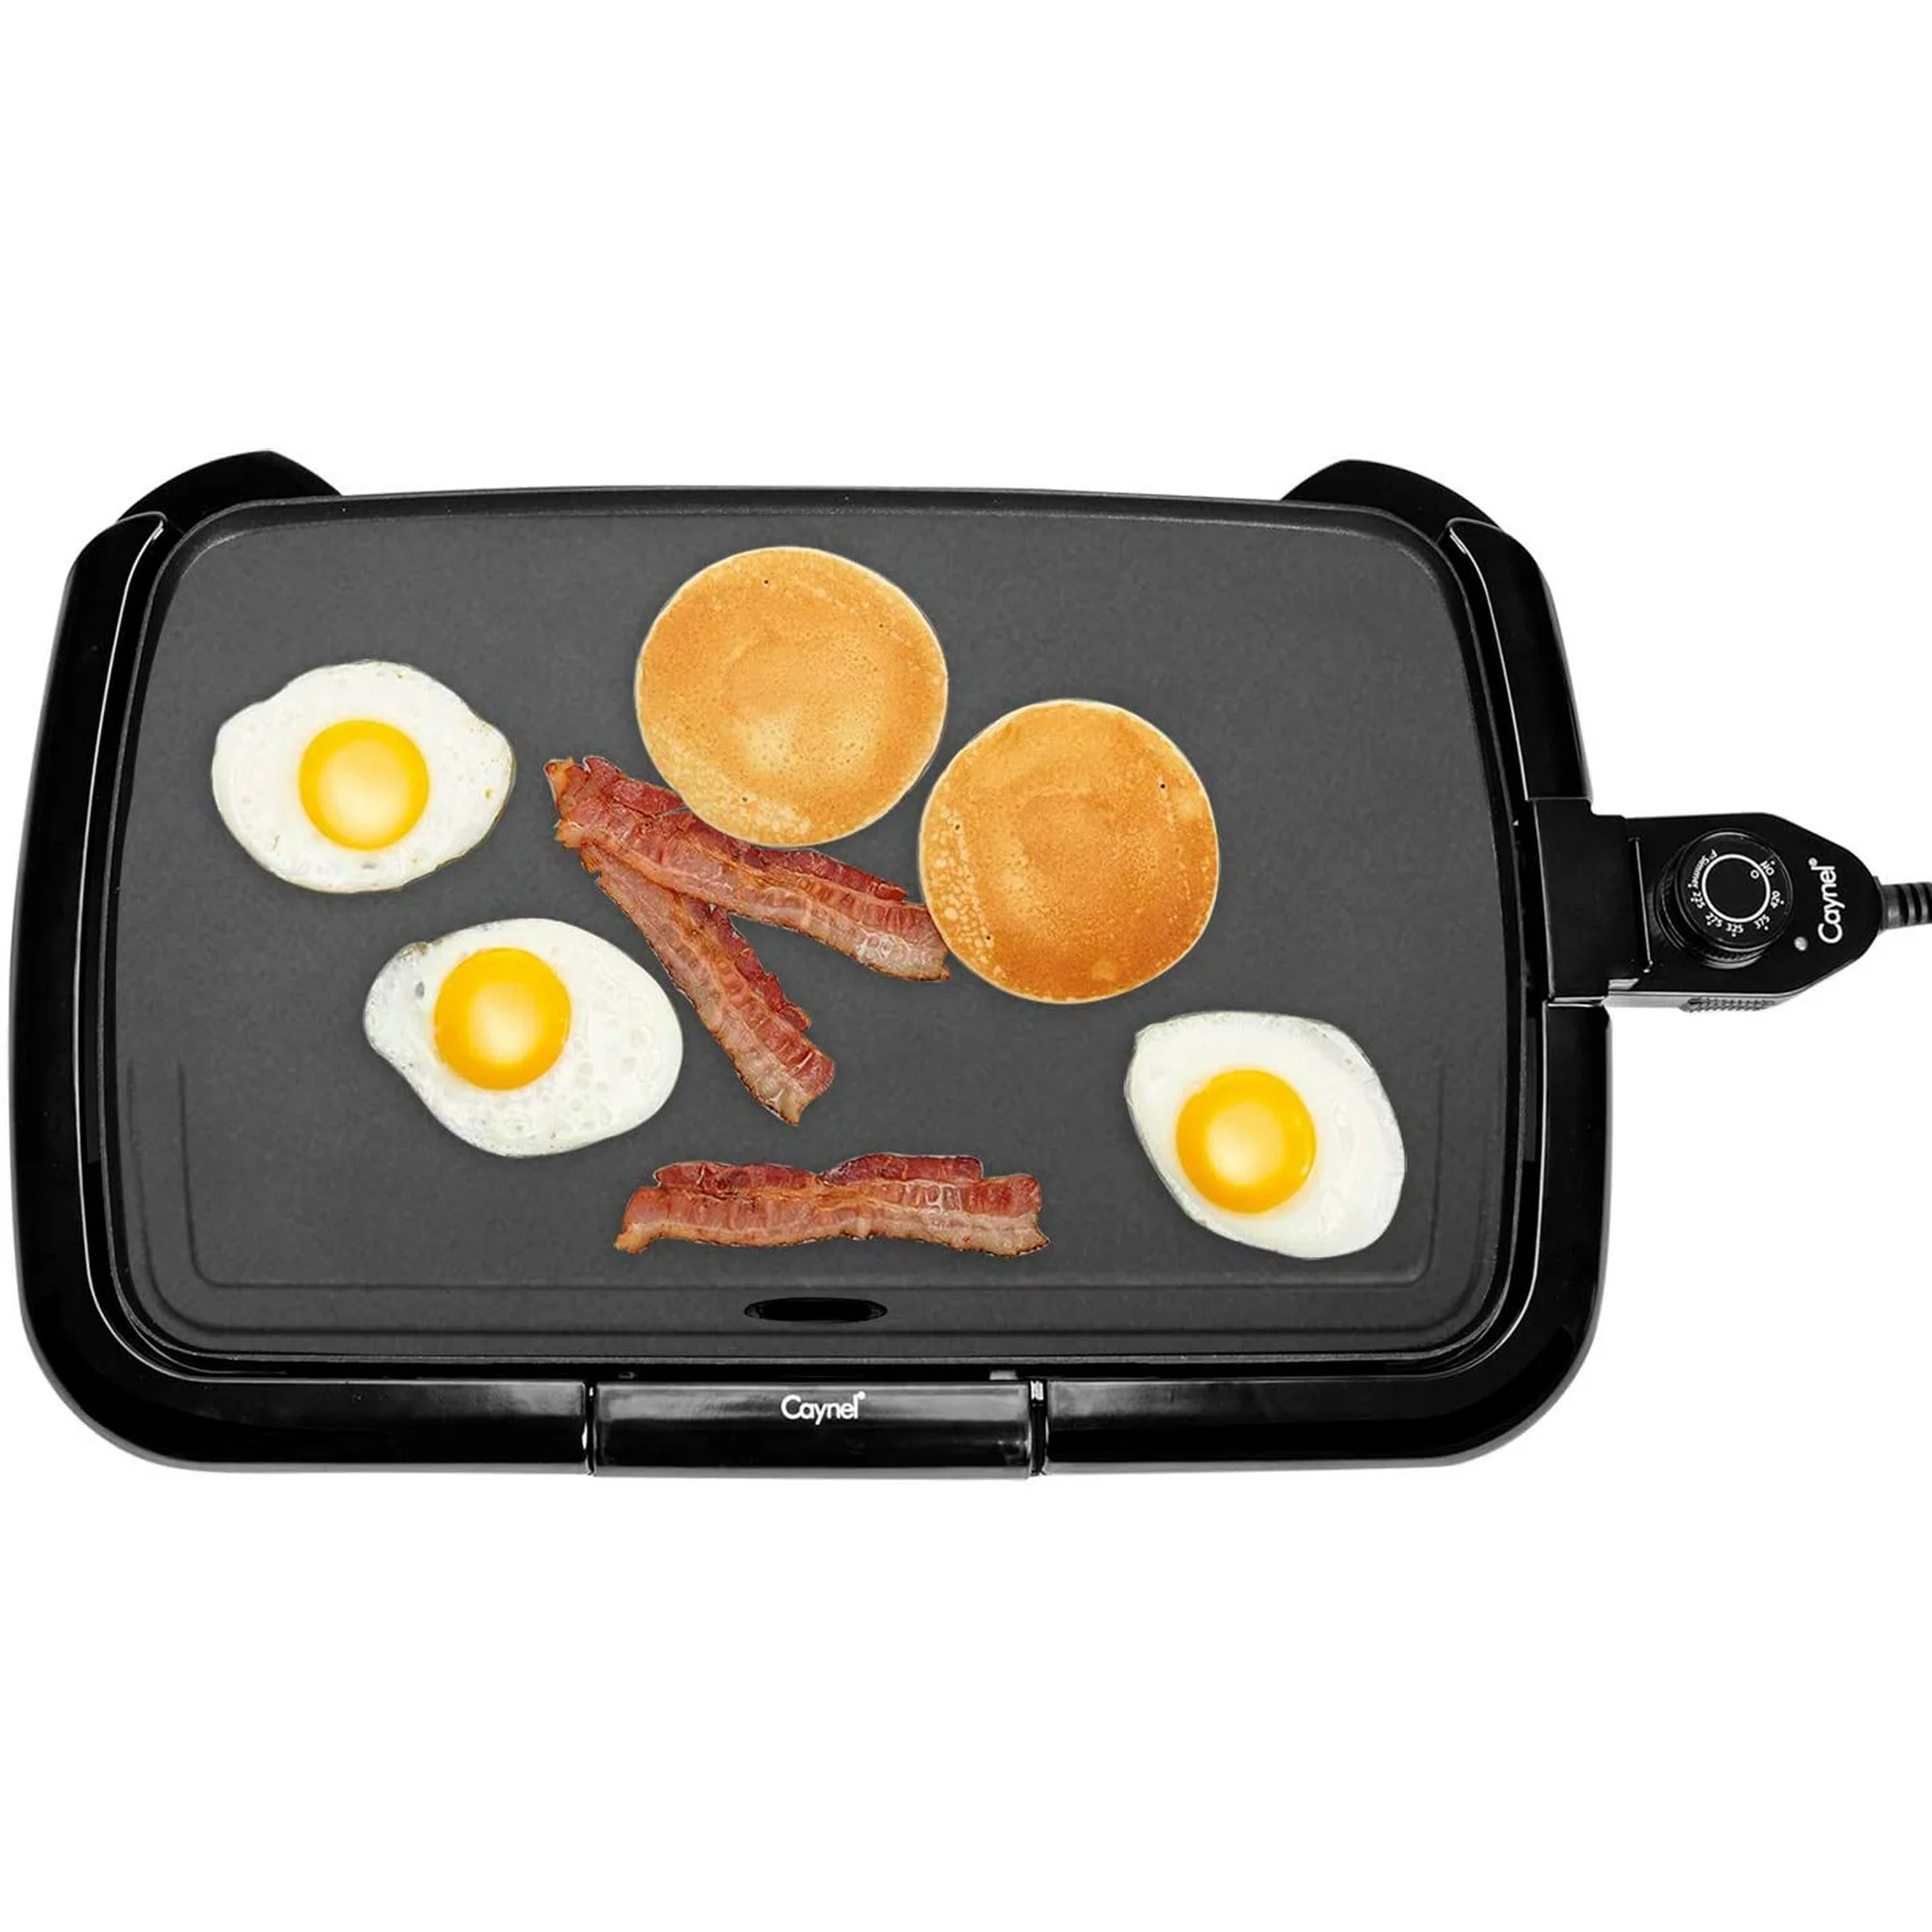 Caynel 16 x10  professional electric griddle with adjustable temperature control  1  thumb200